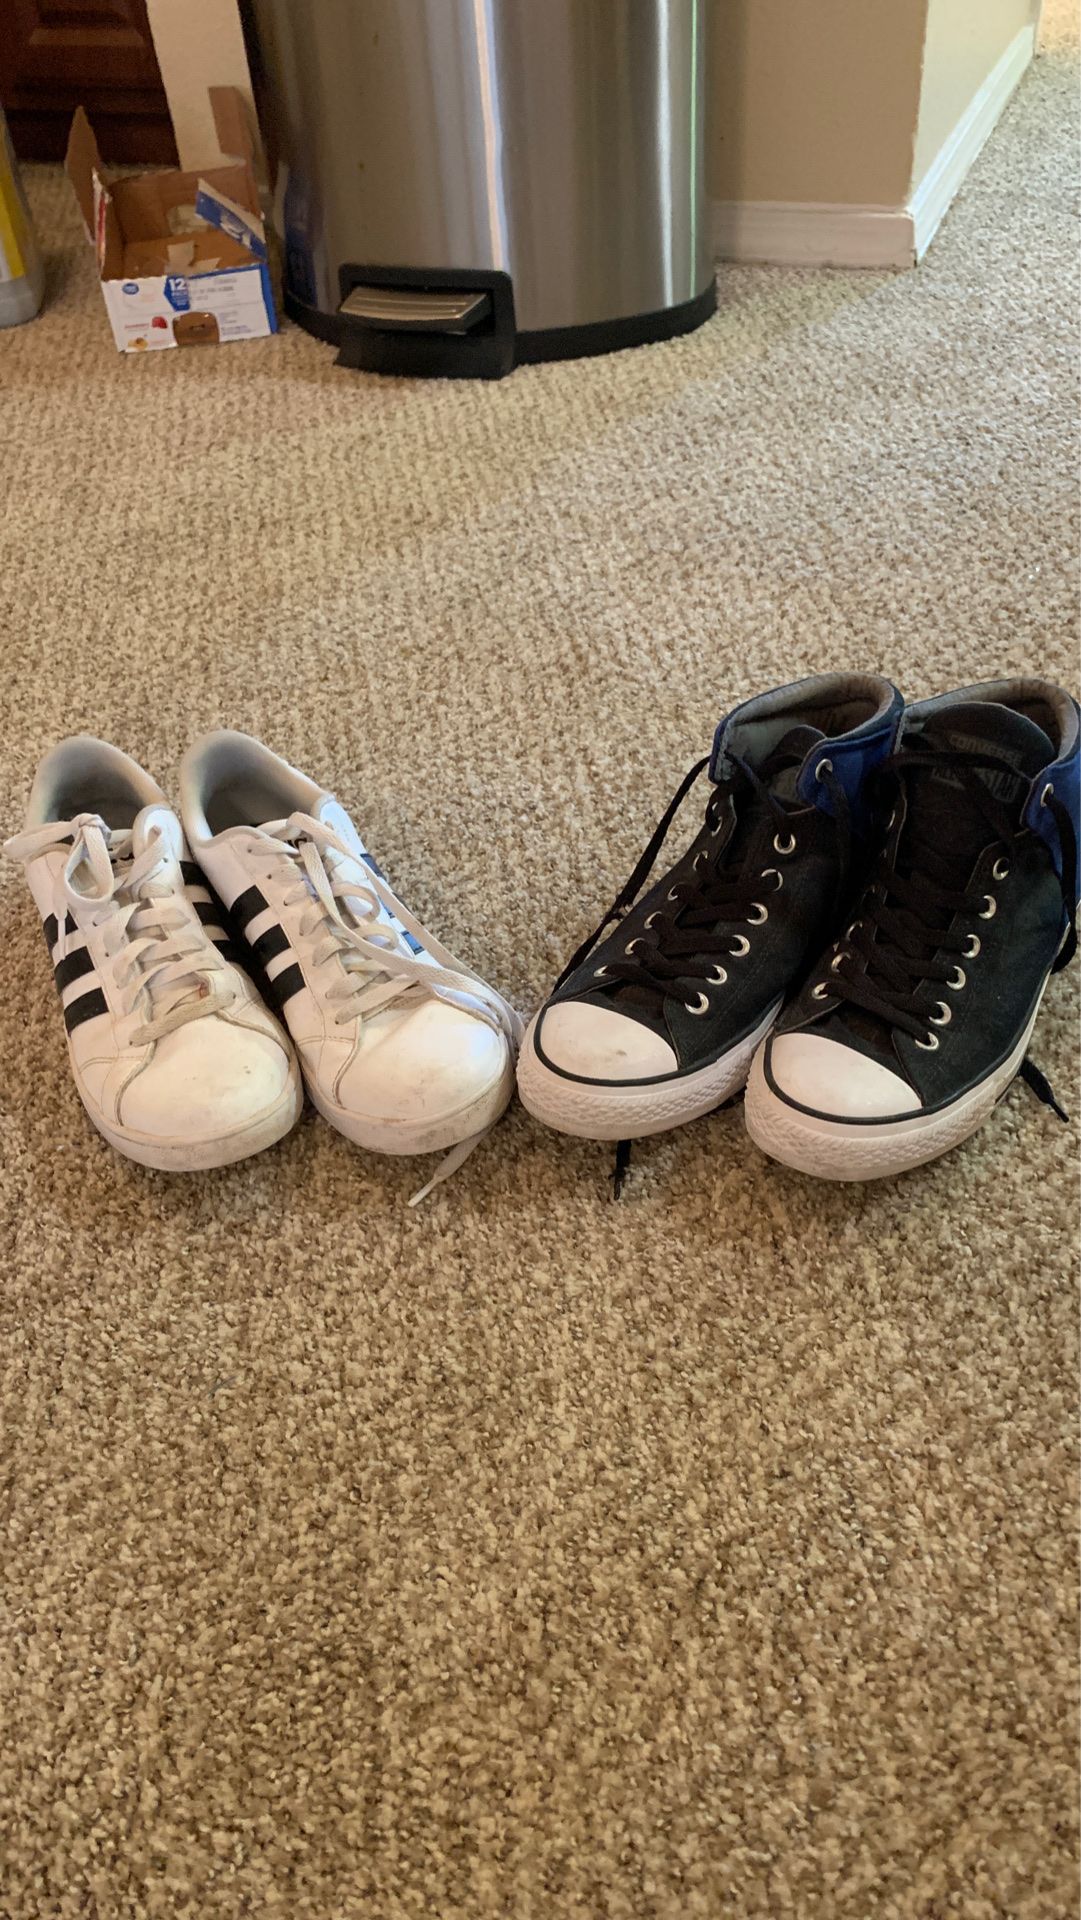 Beater Sneakers (Adidas Size 10 Mens, Converse Size 11 Mens)